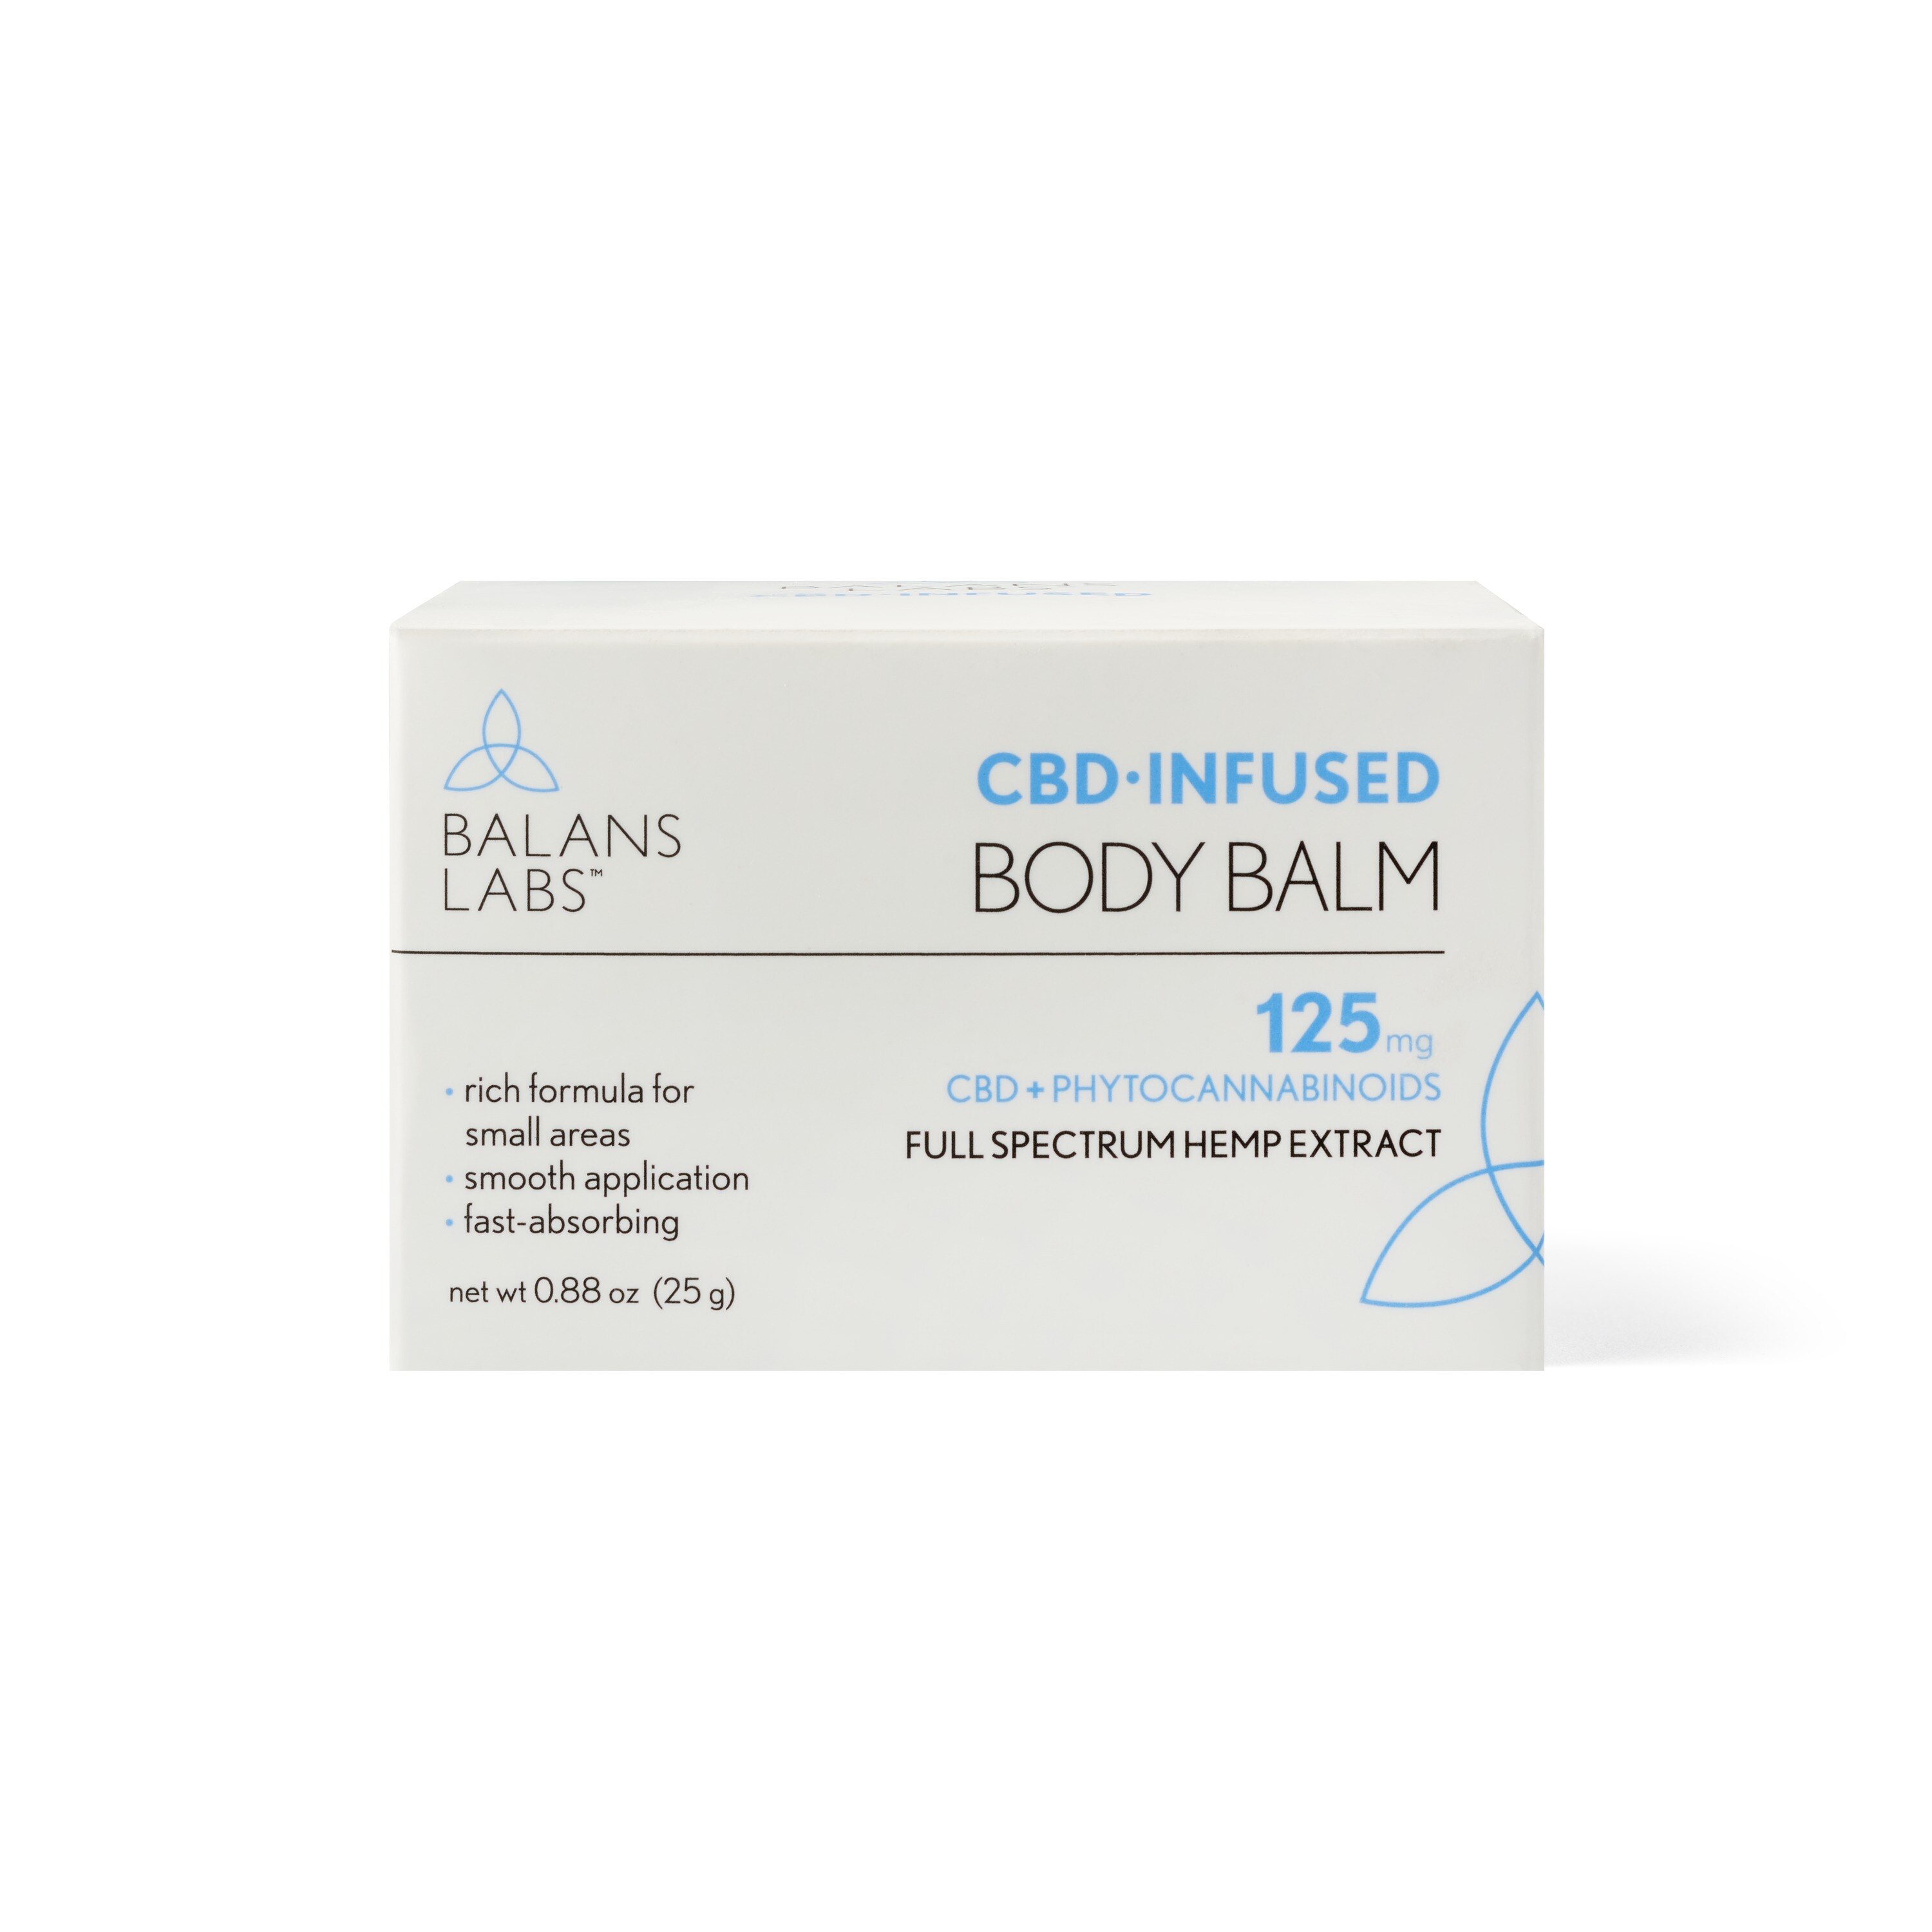 BALANS LABS CBD-Infused Body Balm, 0.88 OZ - State Restrictions Apply